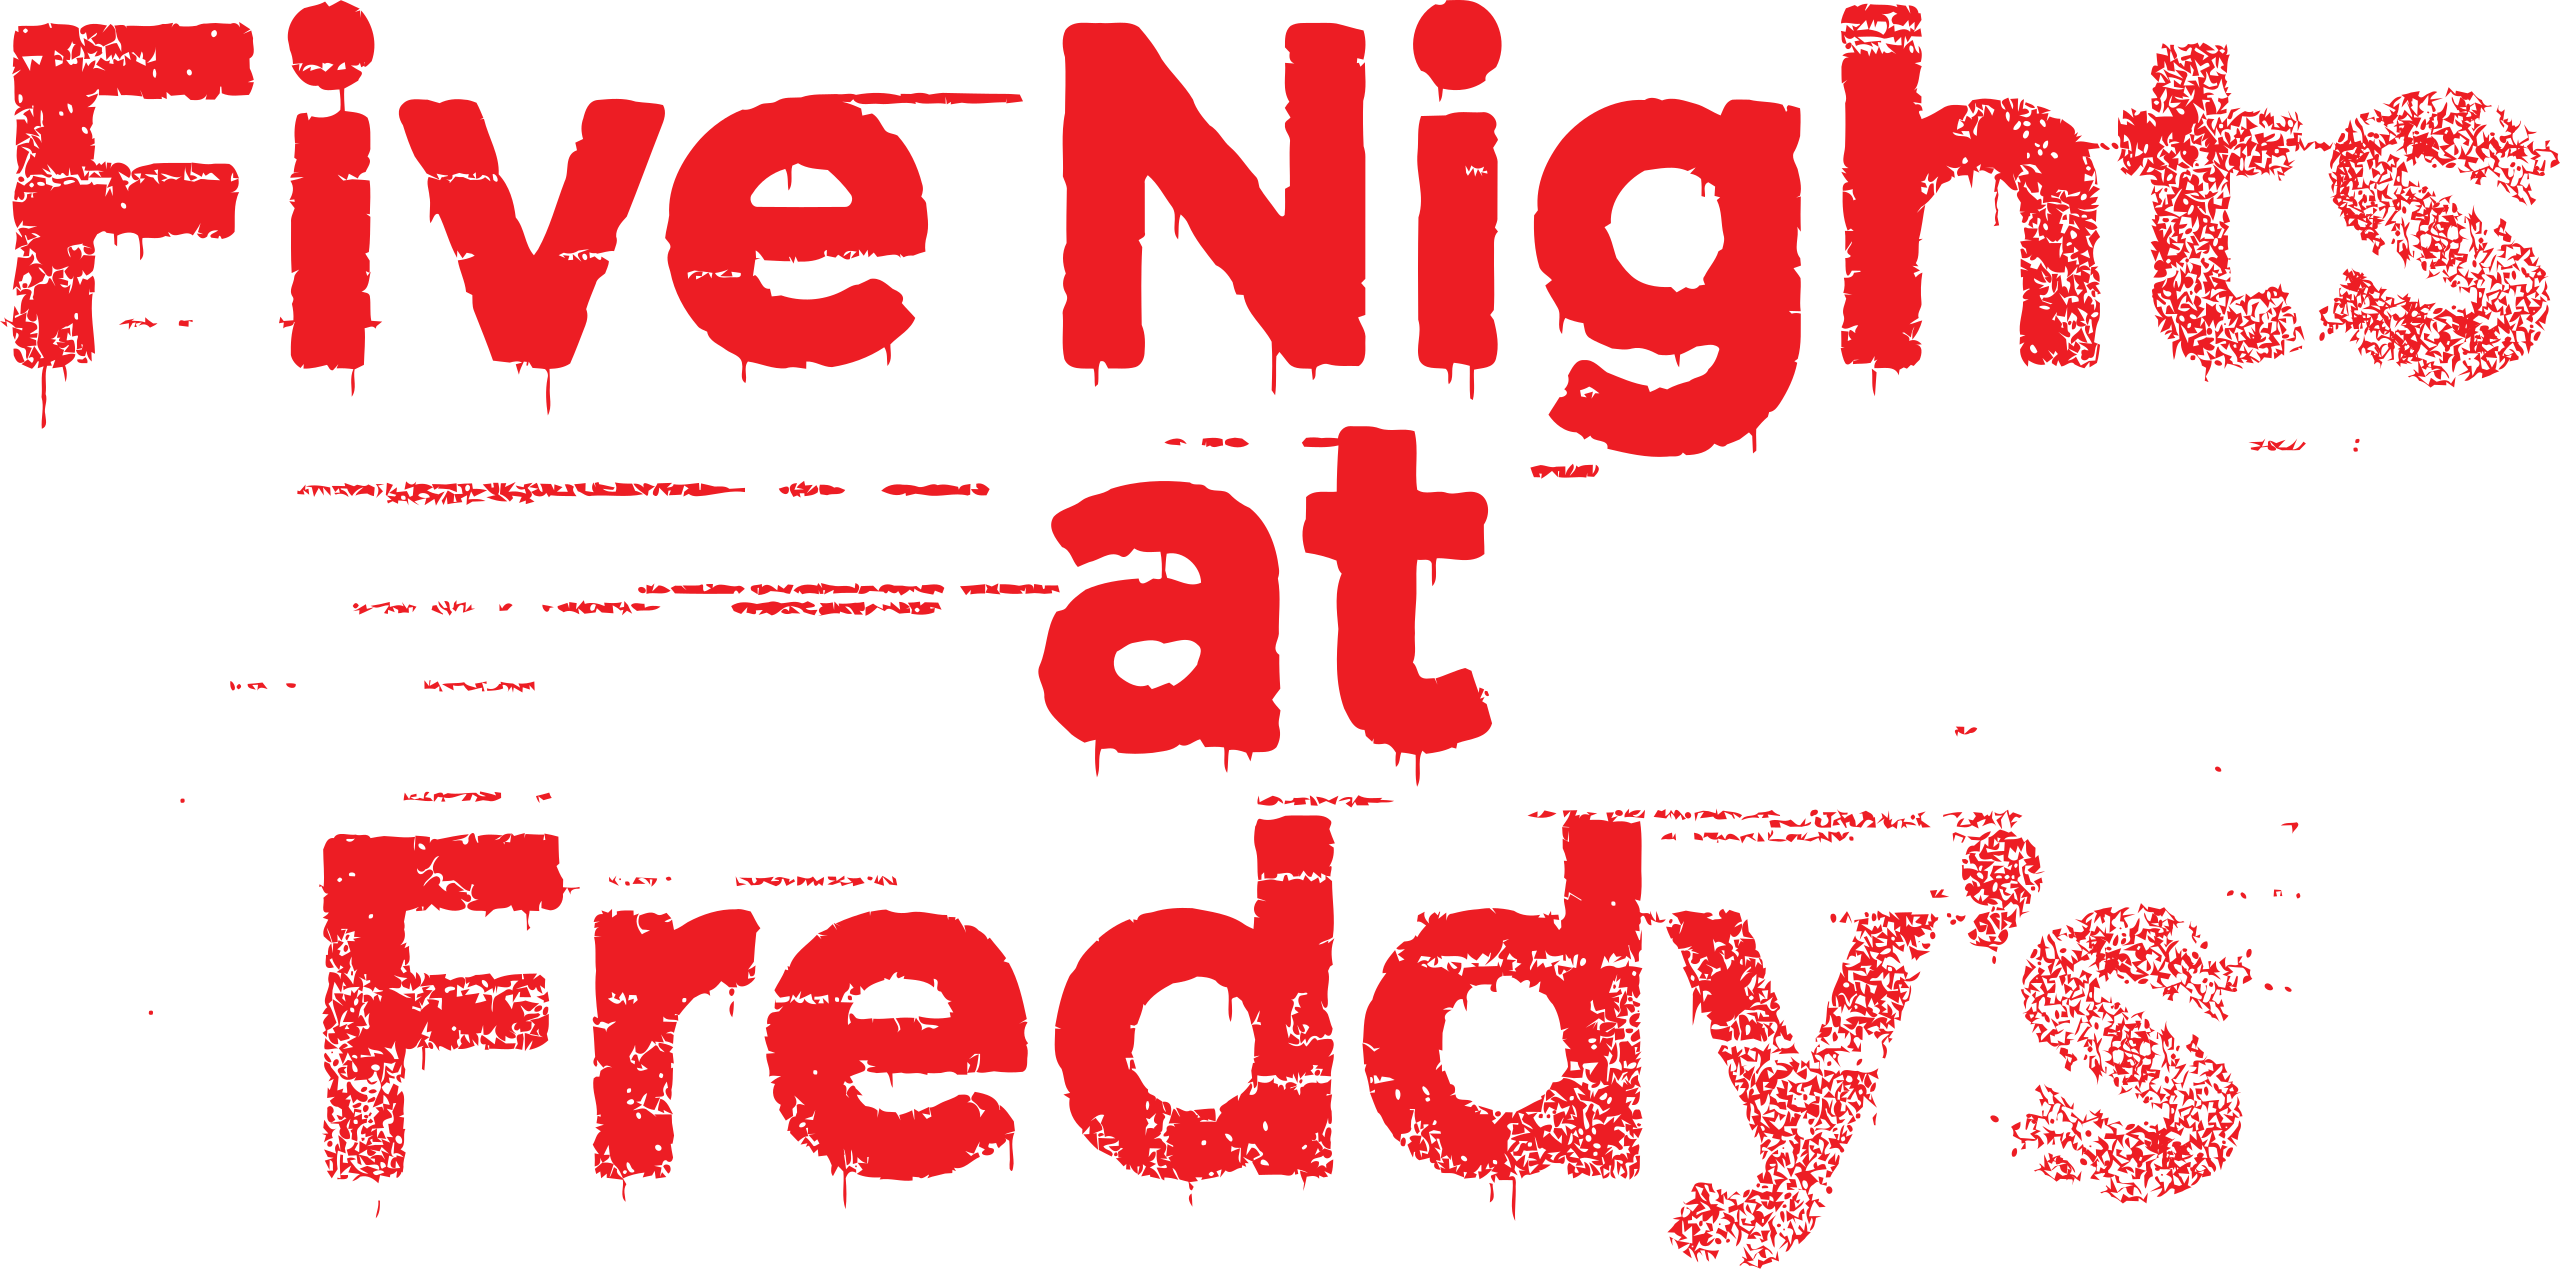 chelsea bayard recommends Pichers Of Five Nights At Freddys